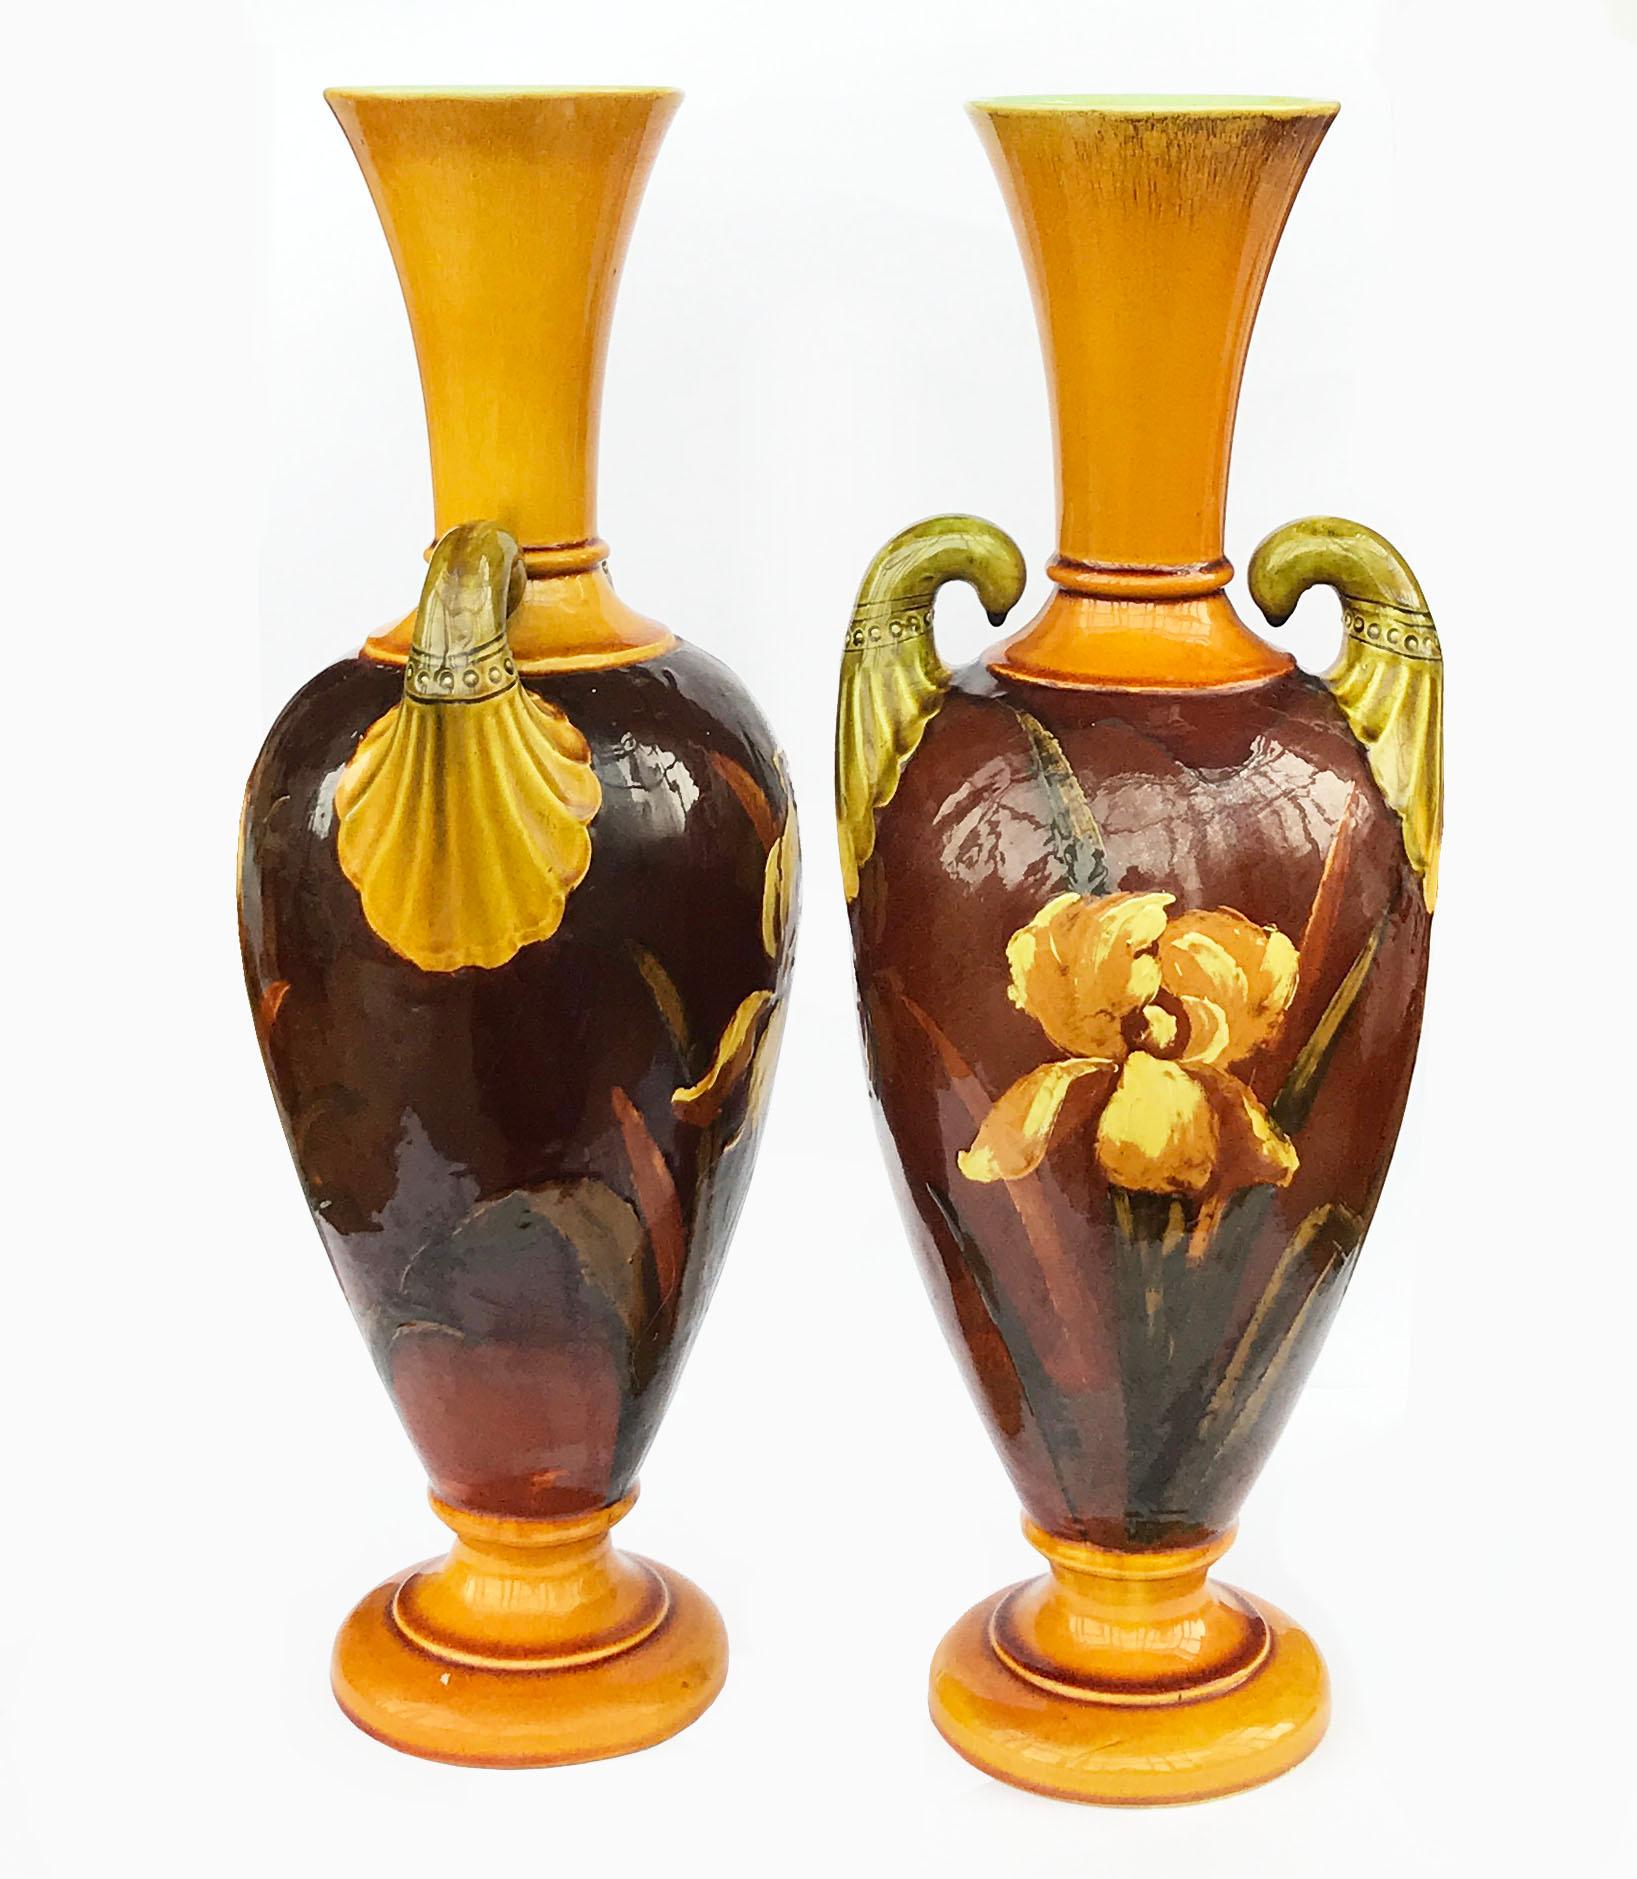 An excellent quality imposing pair of 19th century Arts & Crafts vases, circa 1890
Each with twin Egyptian inspired handles, decorated with amber colored large irises painted in the barbotine technique and all against a body of browns and ochres